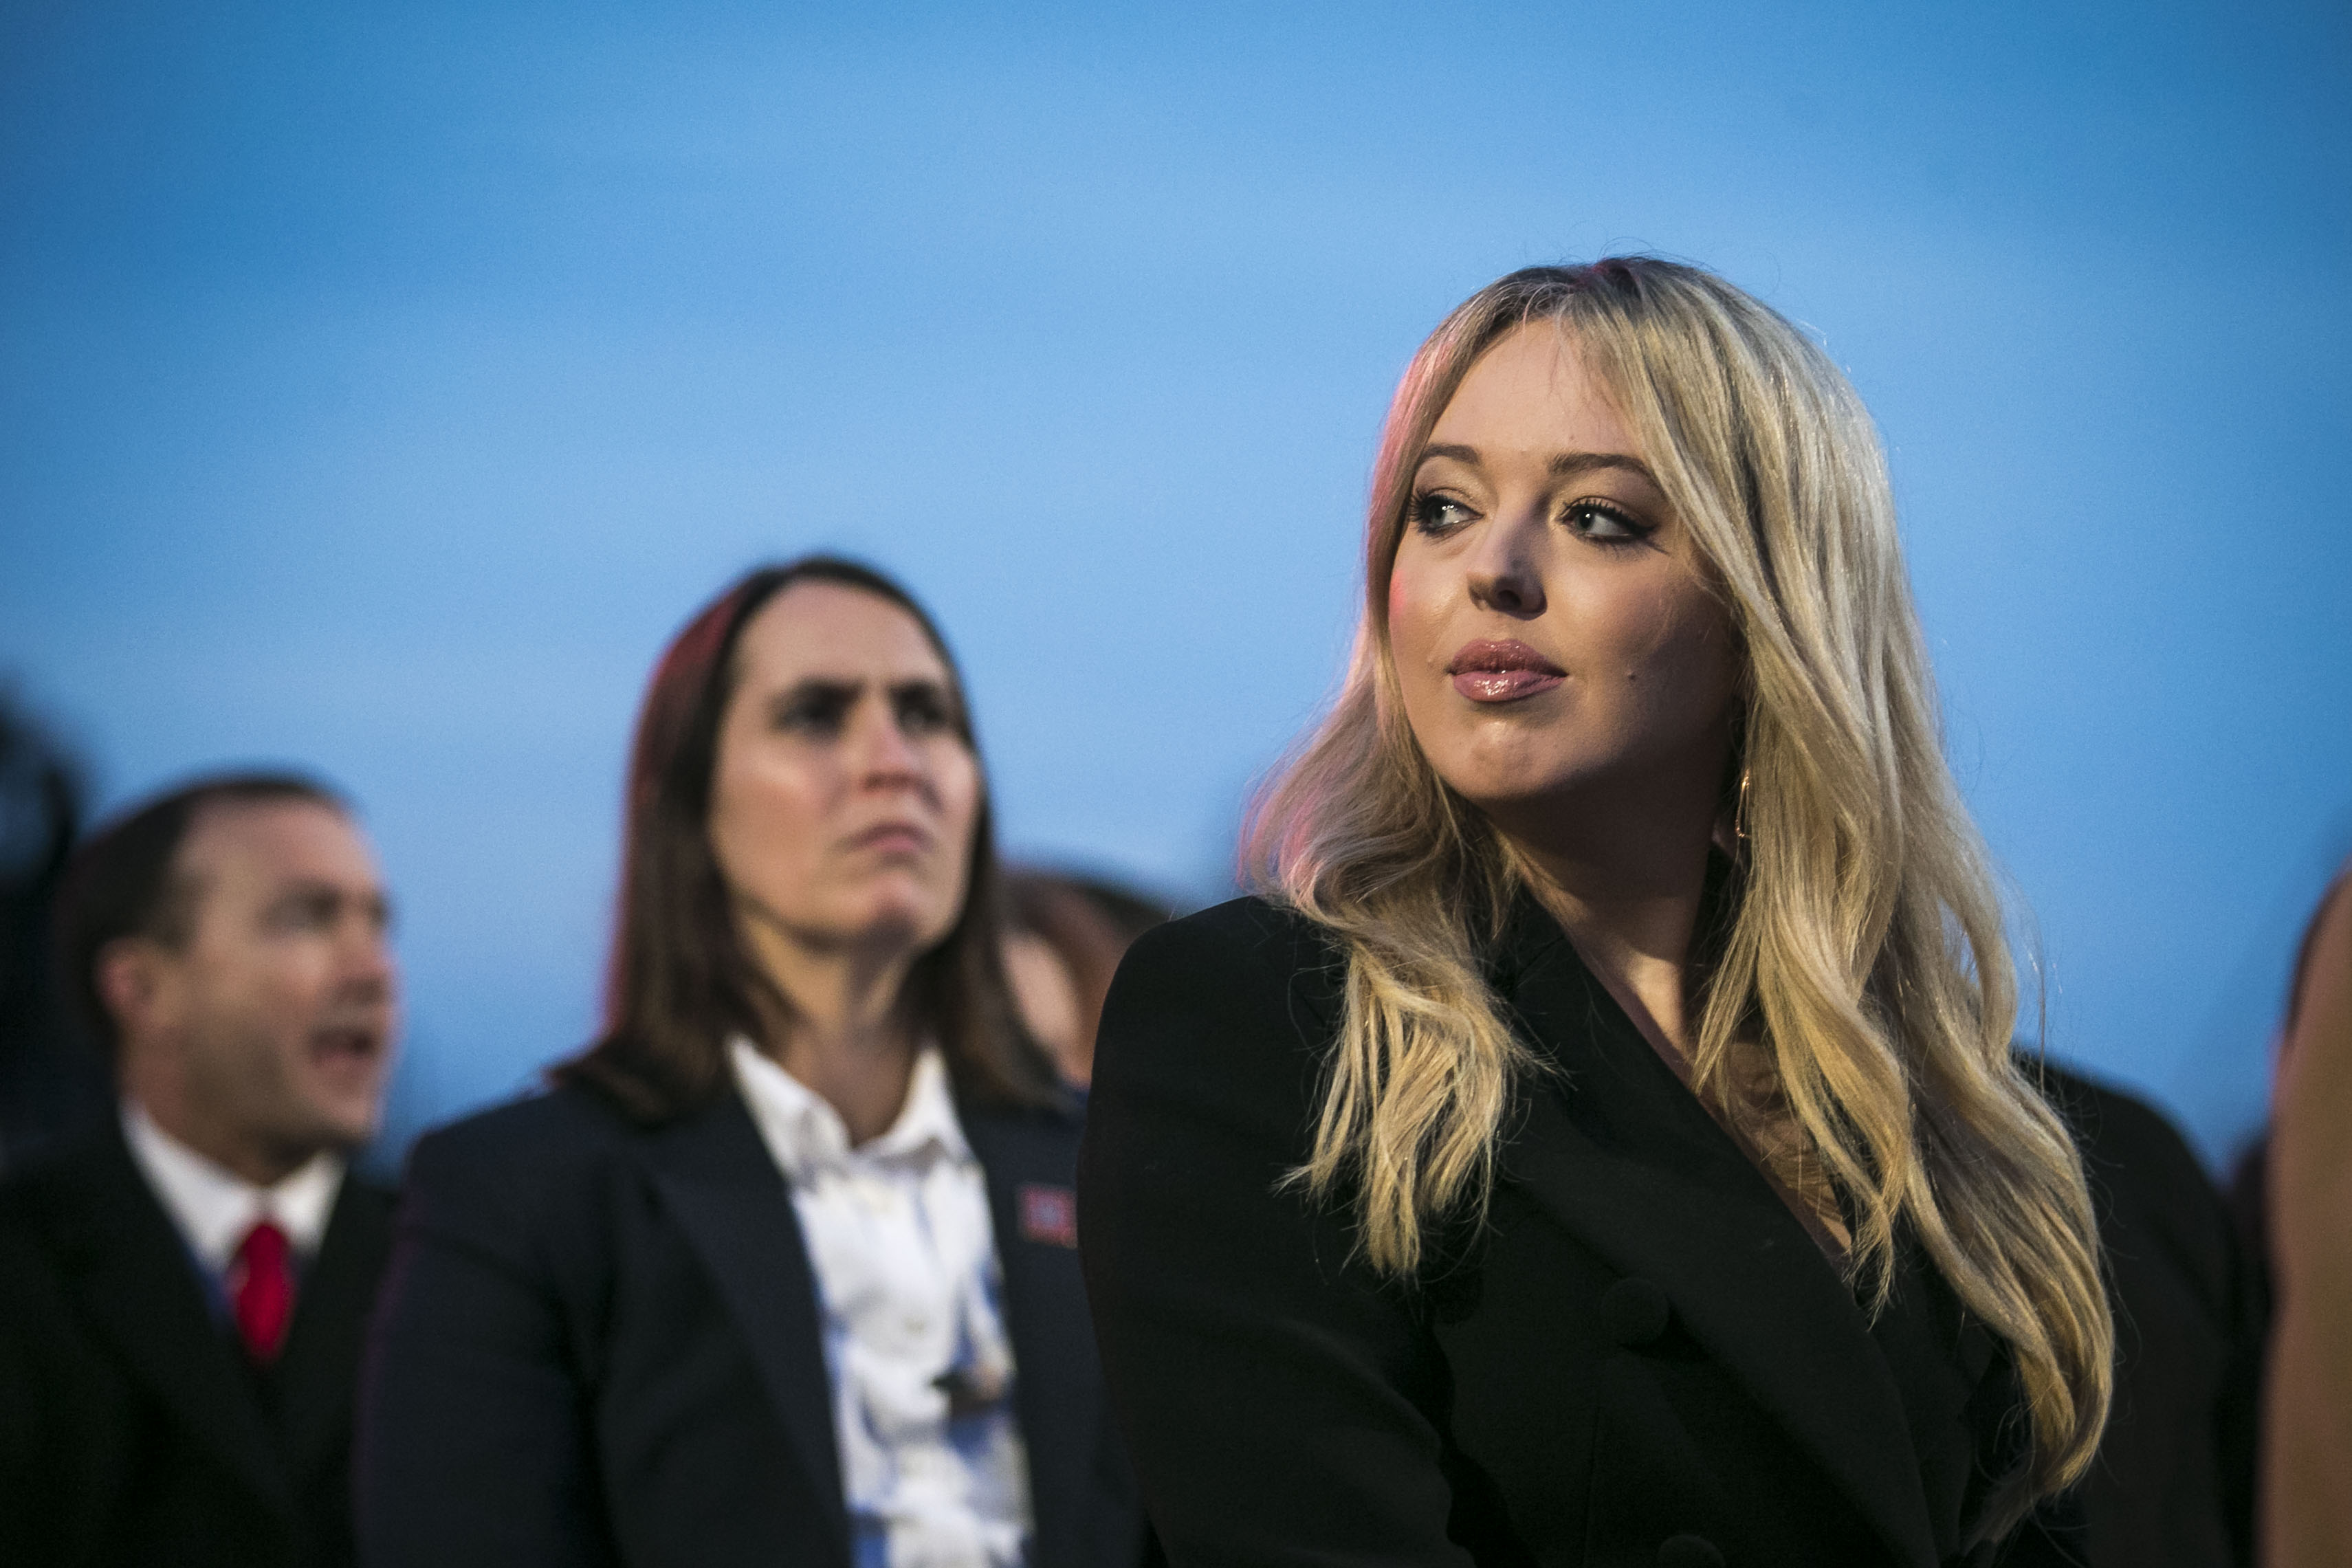 Tiffany Trump, daughter of U.S. President Donald Trump, attends the 95th annual national Christmas tree lighting ceremony held by the National Park Service on the Ellipse near the White House on November 30, 2017| Photo: Getty Images